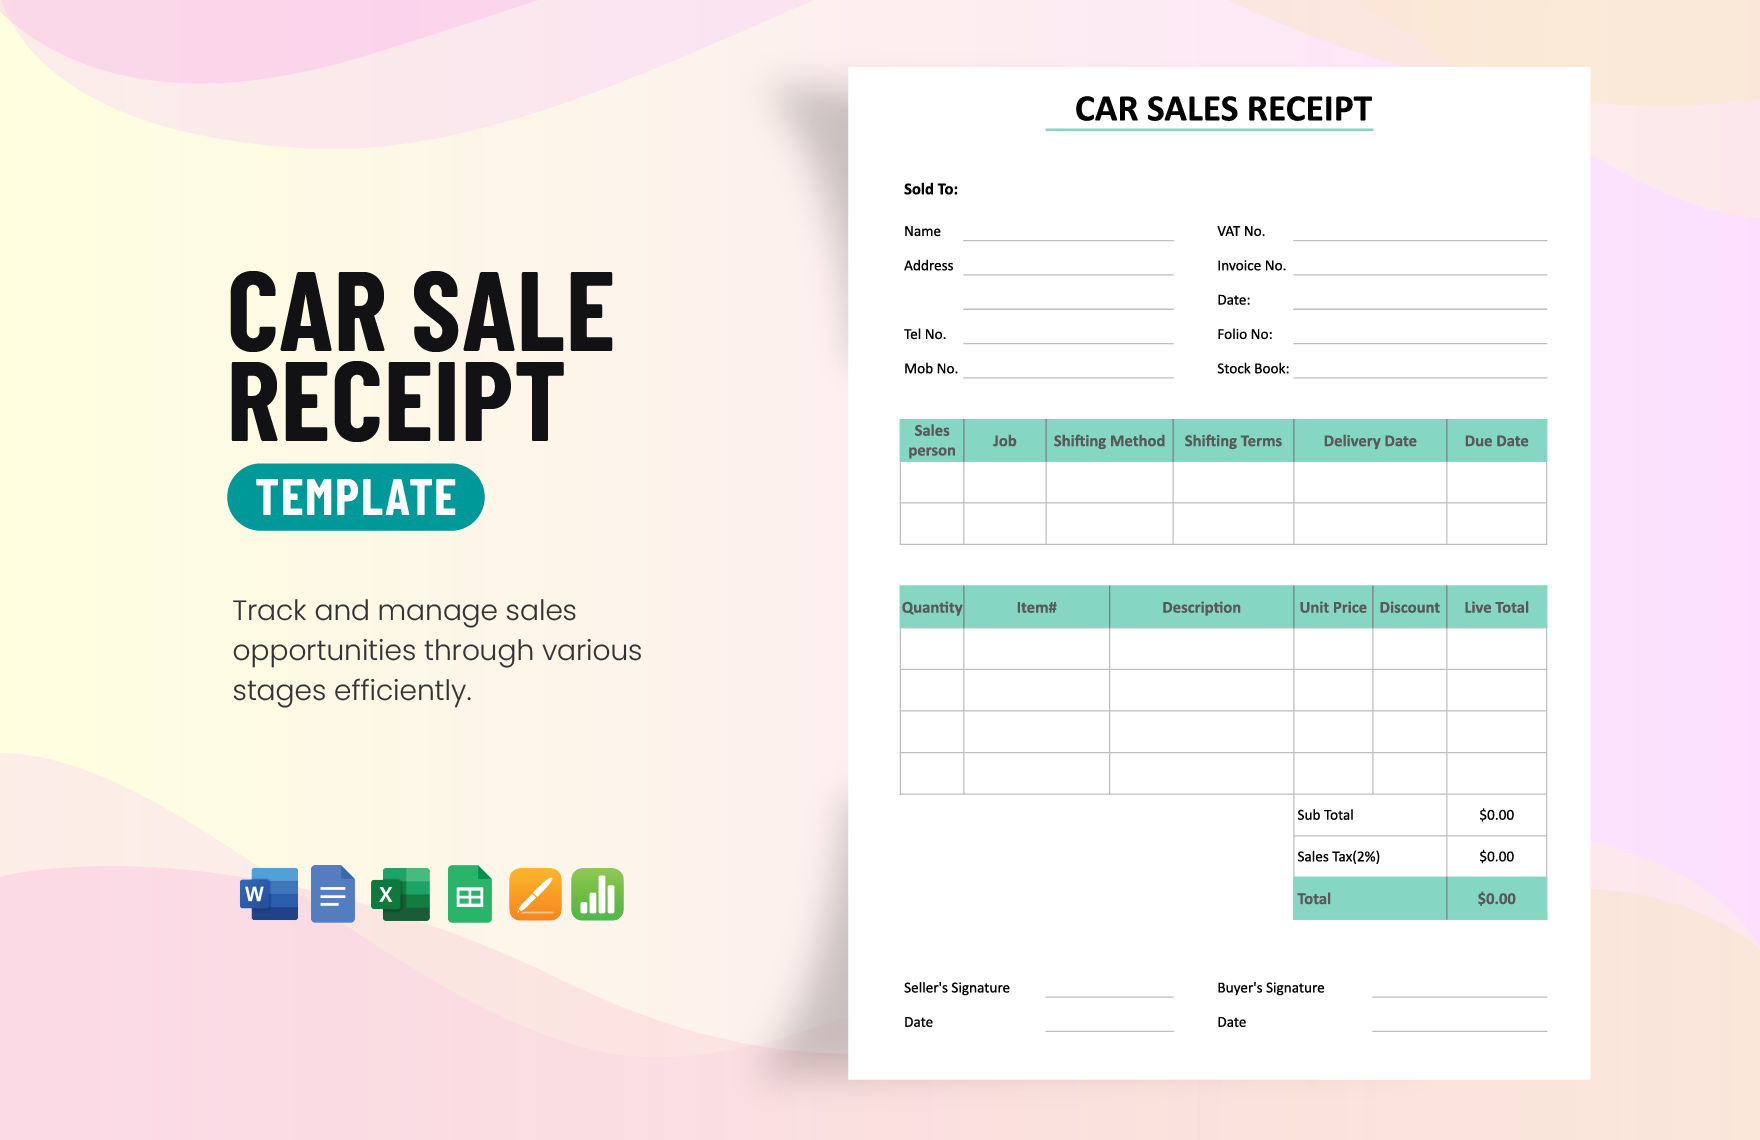 Car Sale Receipt Template in Word, Google Docs, Excel, Google Sheets, Apple Pages, Apple Numbers